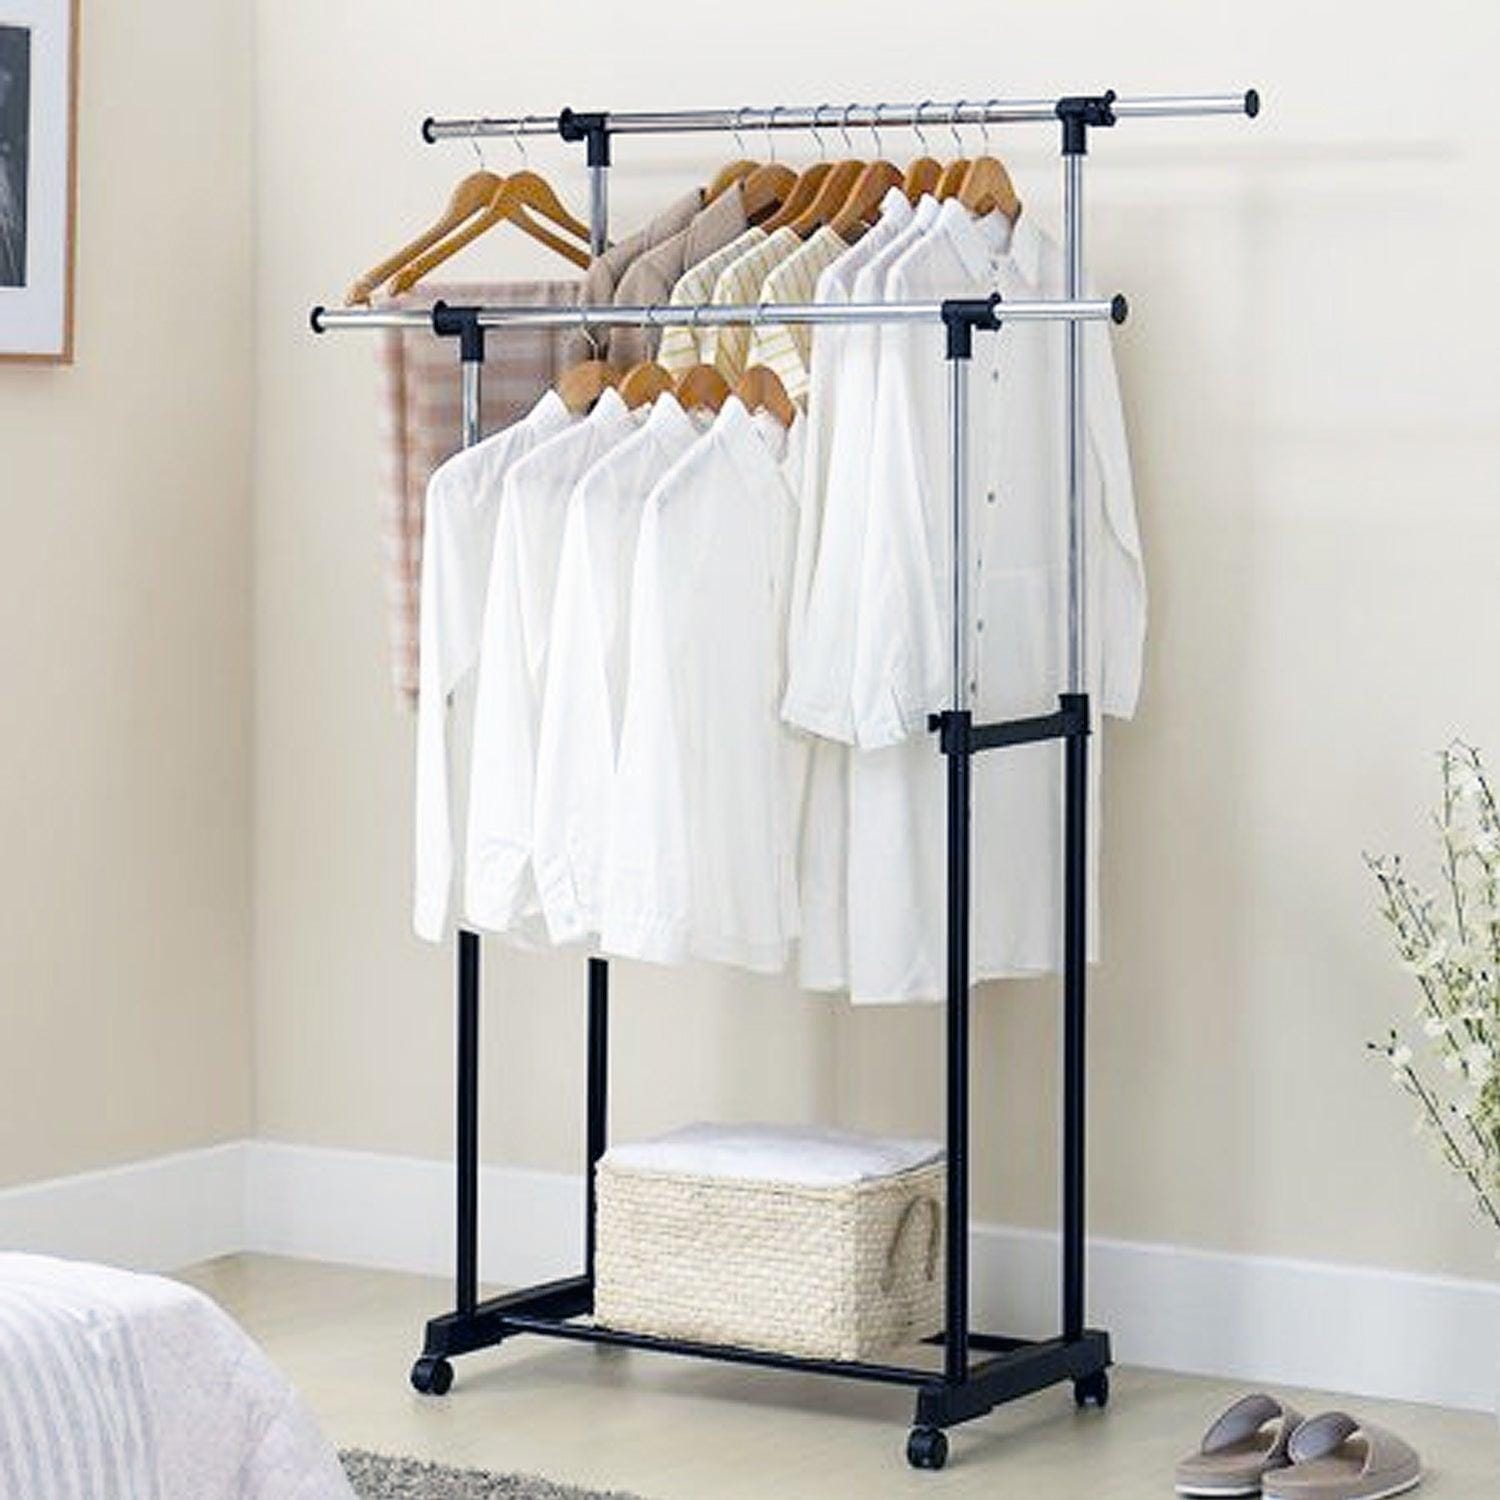 Stainless Steel Double Pole Telescopic Folding Clothes Drying Rack (30 Kilos Capacity)